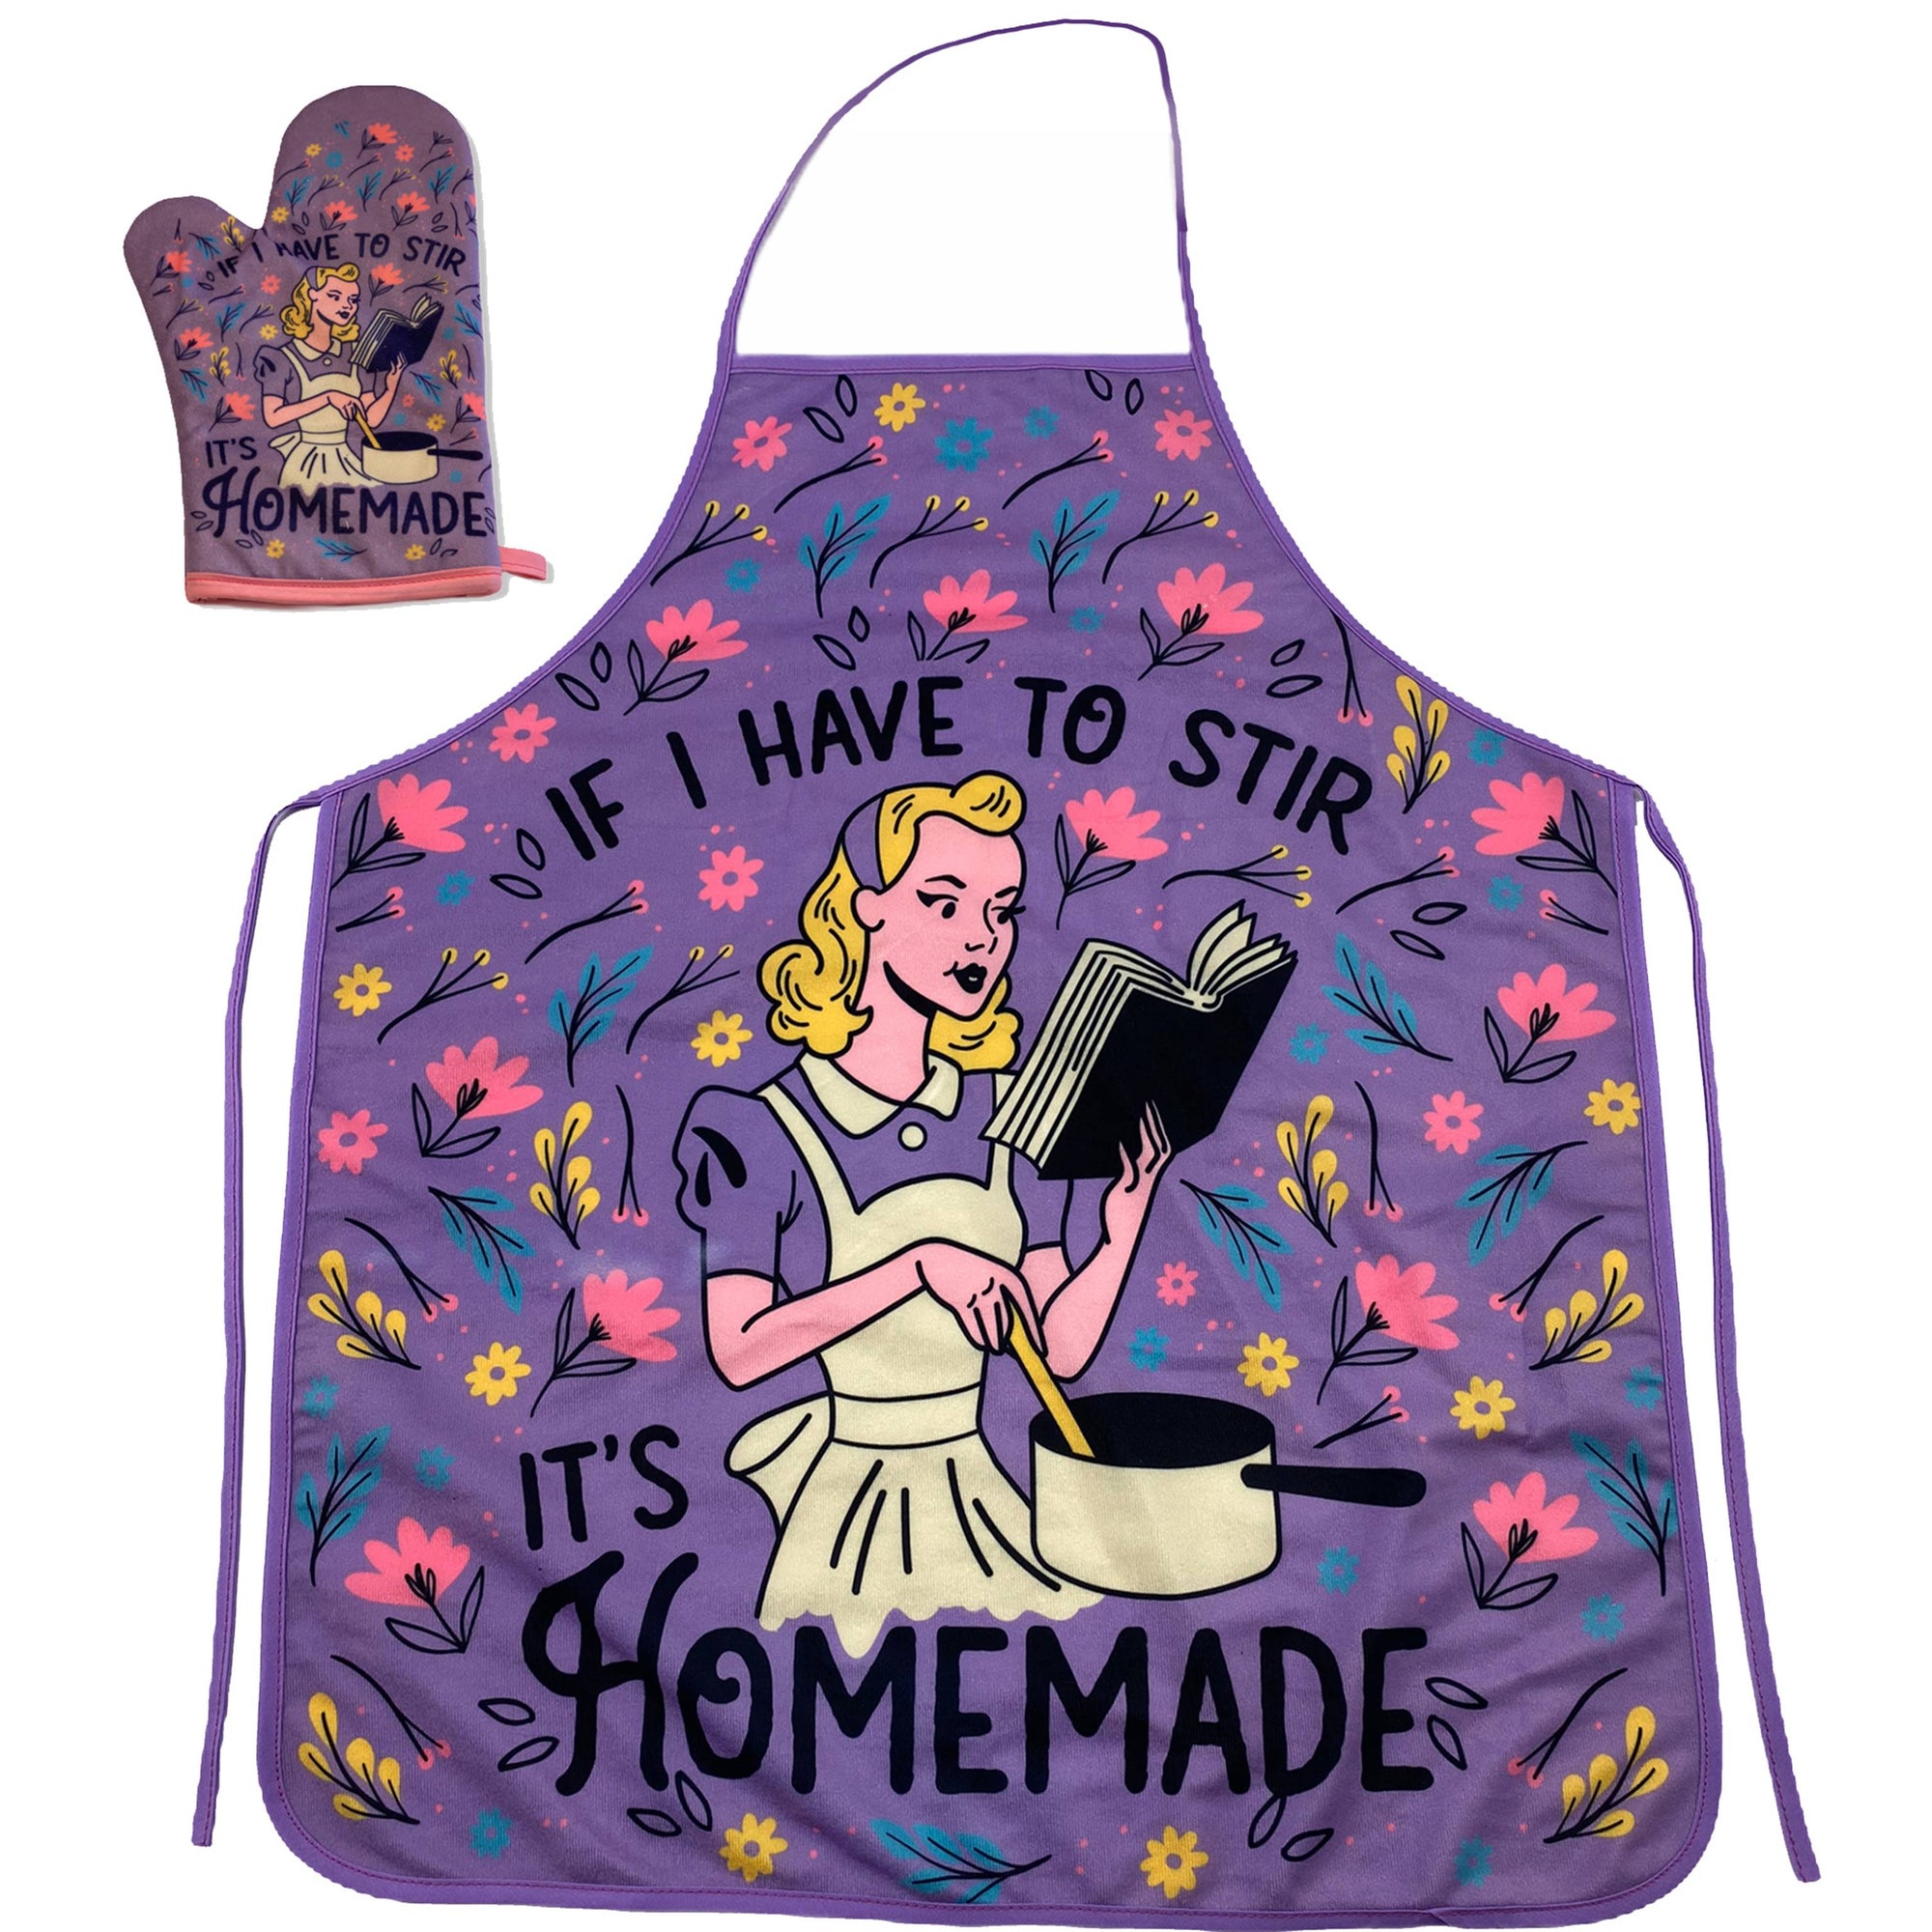 Funny Purple If I Have To Stir It's Homemade Oven Mitt + Apron Nerdy Food Tee